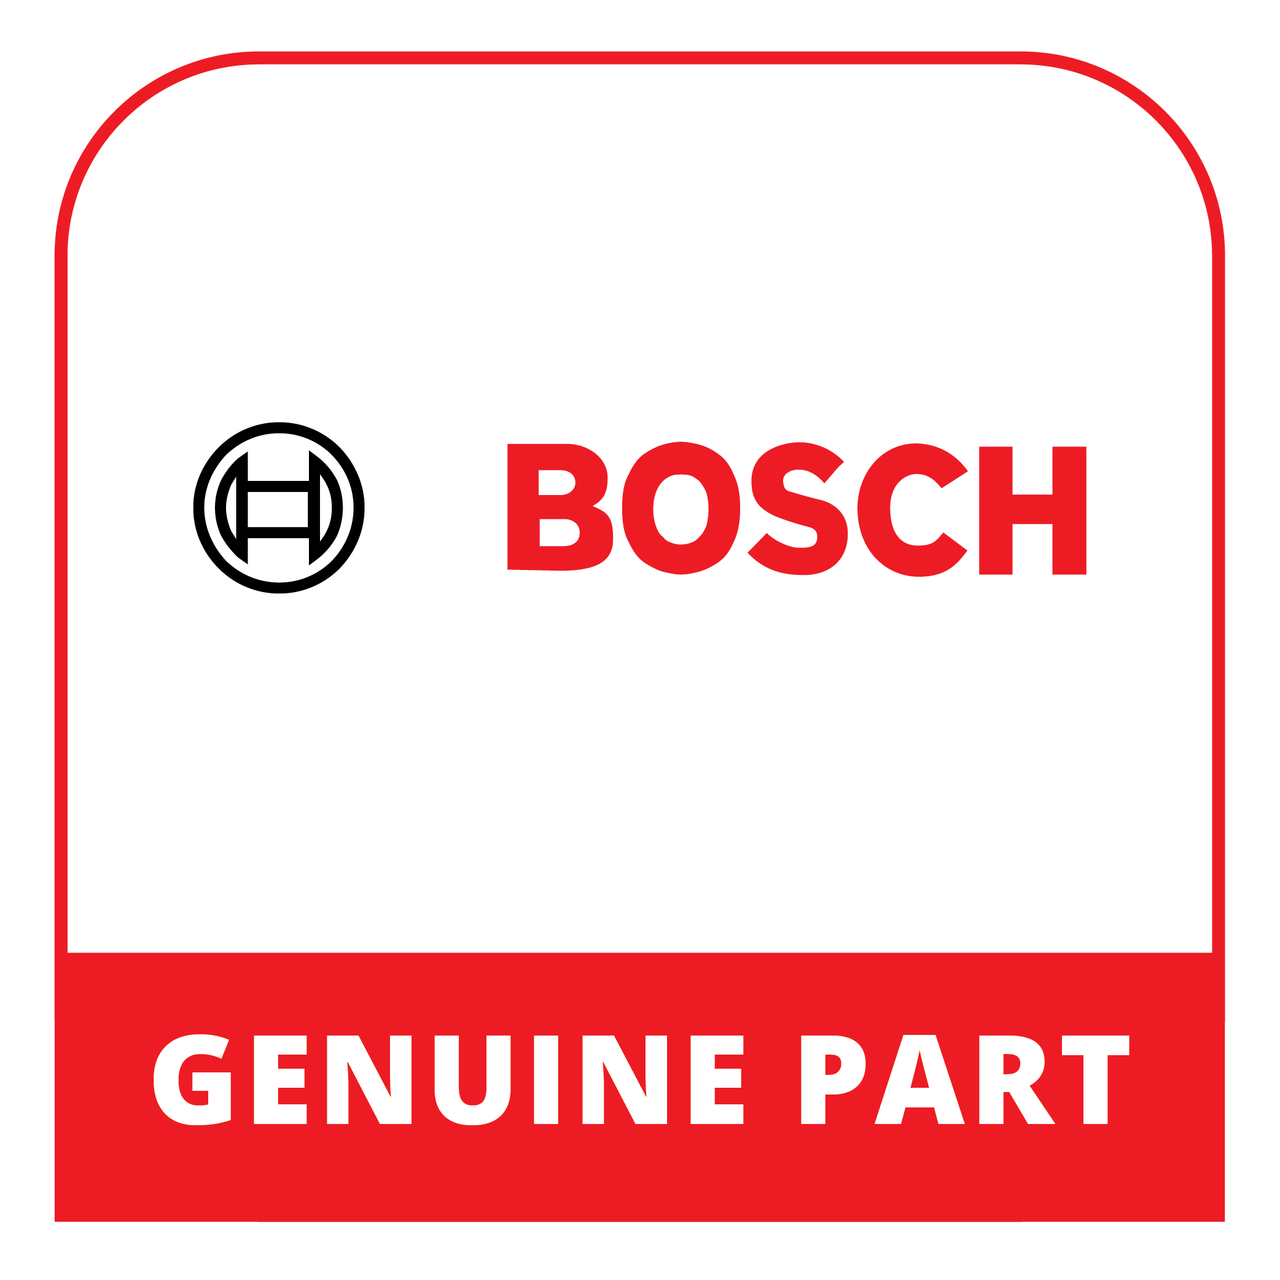 Bosch (Thermador) 12027090 - Control Module Programmed - Genuine Bosch (Thermador) Part